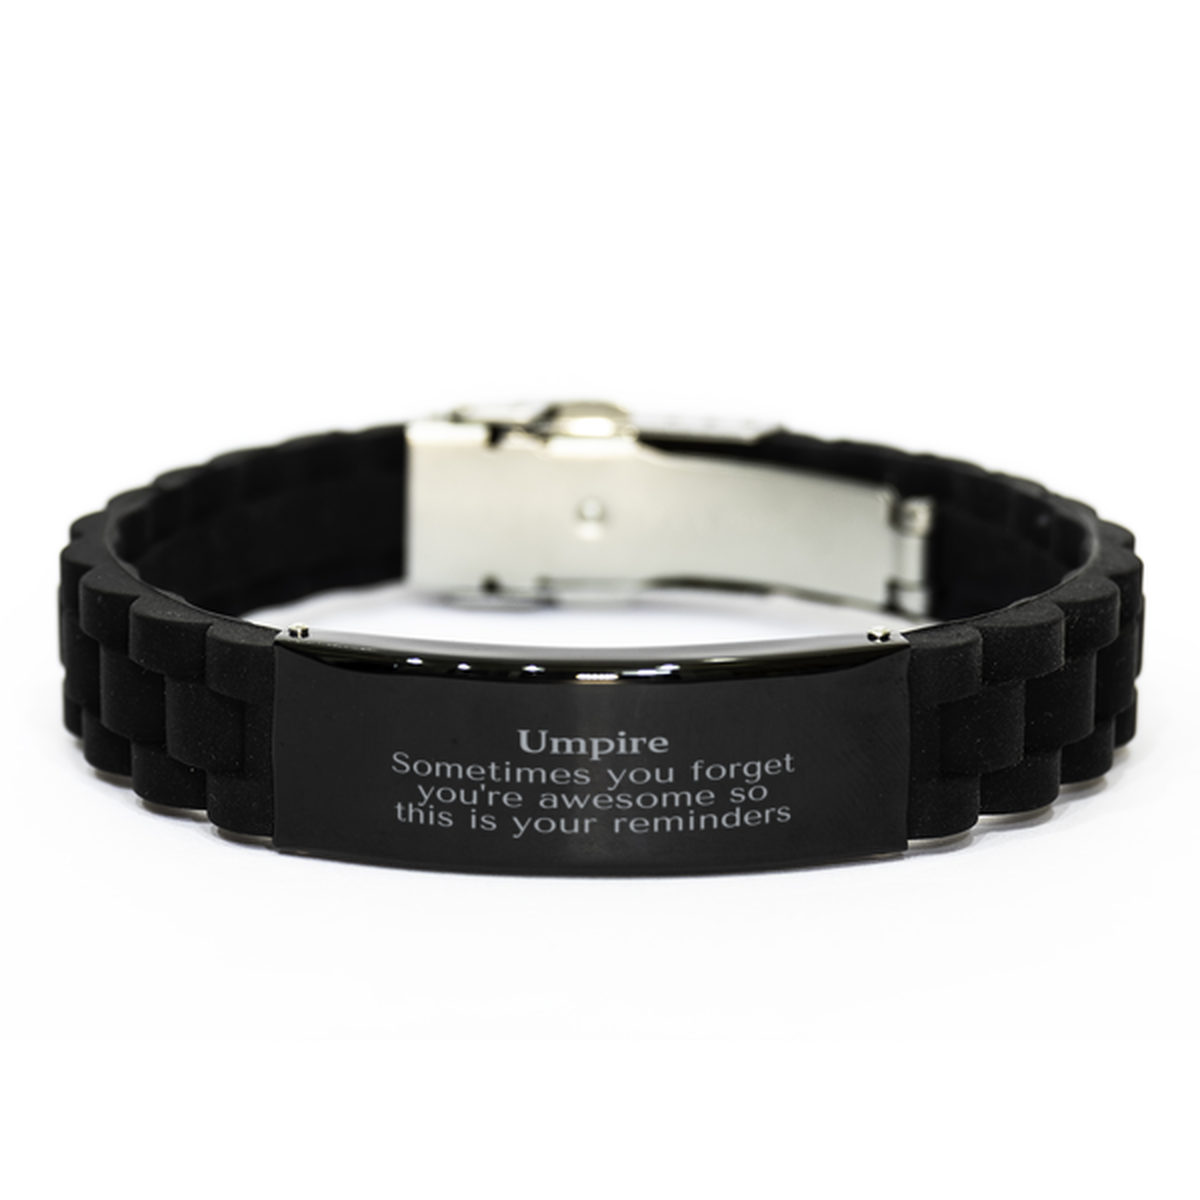 Sentimental Umpire Black Glidelock Clasp Bracelet, Umpire Sometimes you forget you're awesome so this is your reminders, Graduation Christmas Birthday Gifts for Umpire, Men, Women, Coworkers